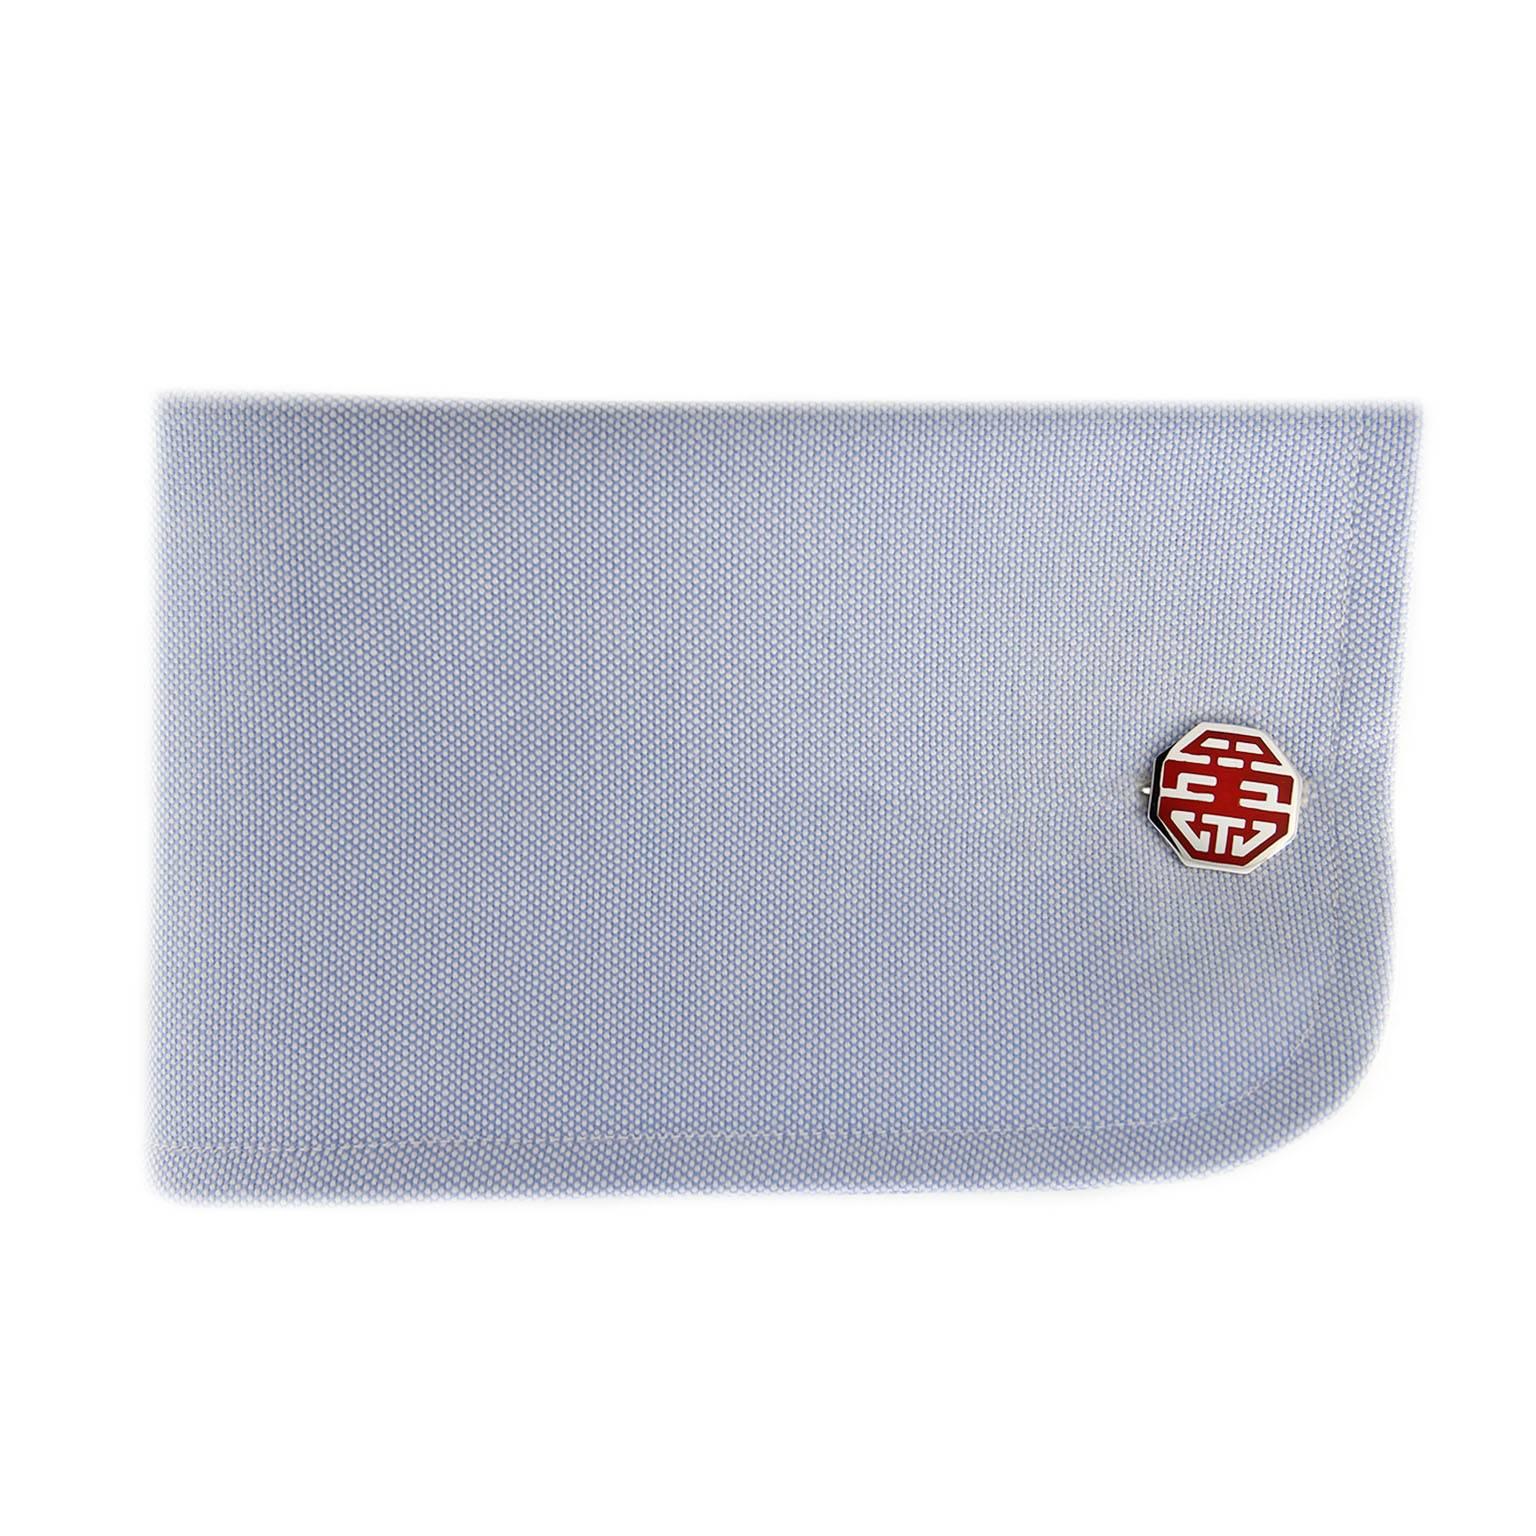 Jona design collection “Long & happy Life”, hand crafted in Italy, sterling silver cufflinks with red enamel . Chinese luck bringer symbol since the time of emperors. Dimensions: Large button 0.56